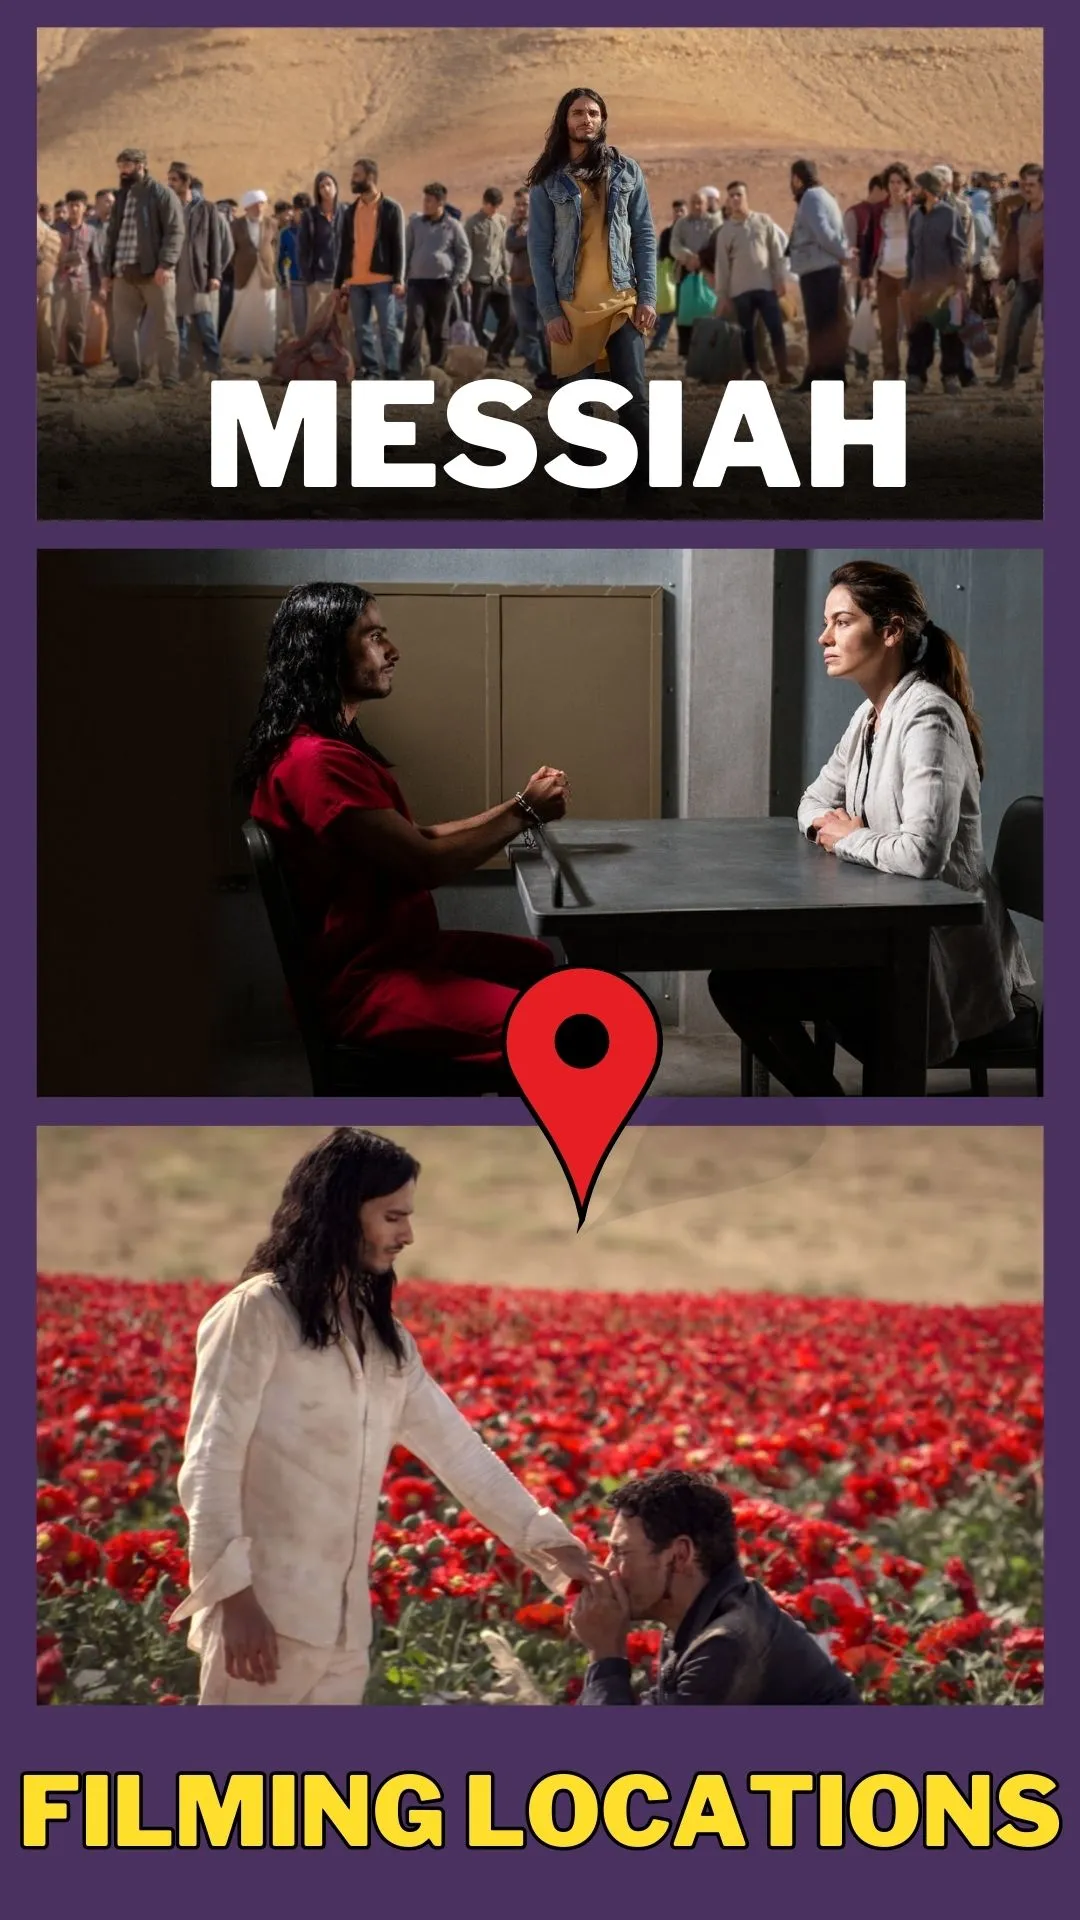 Messiah Filming Locations